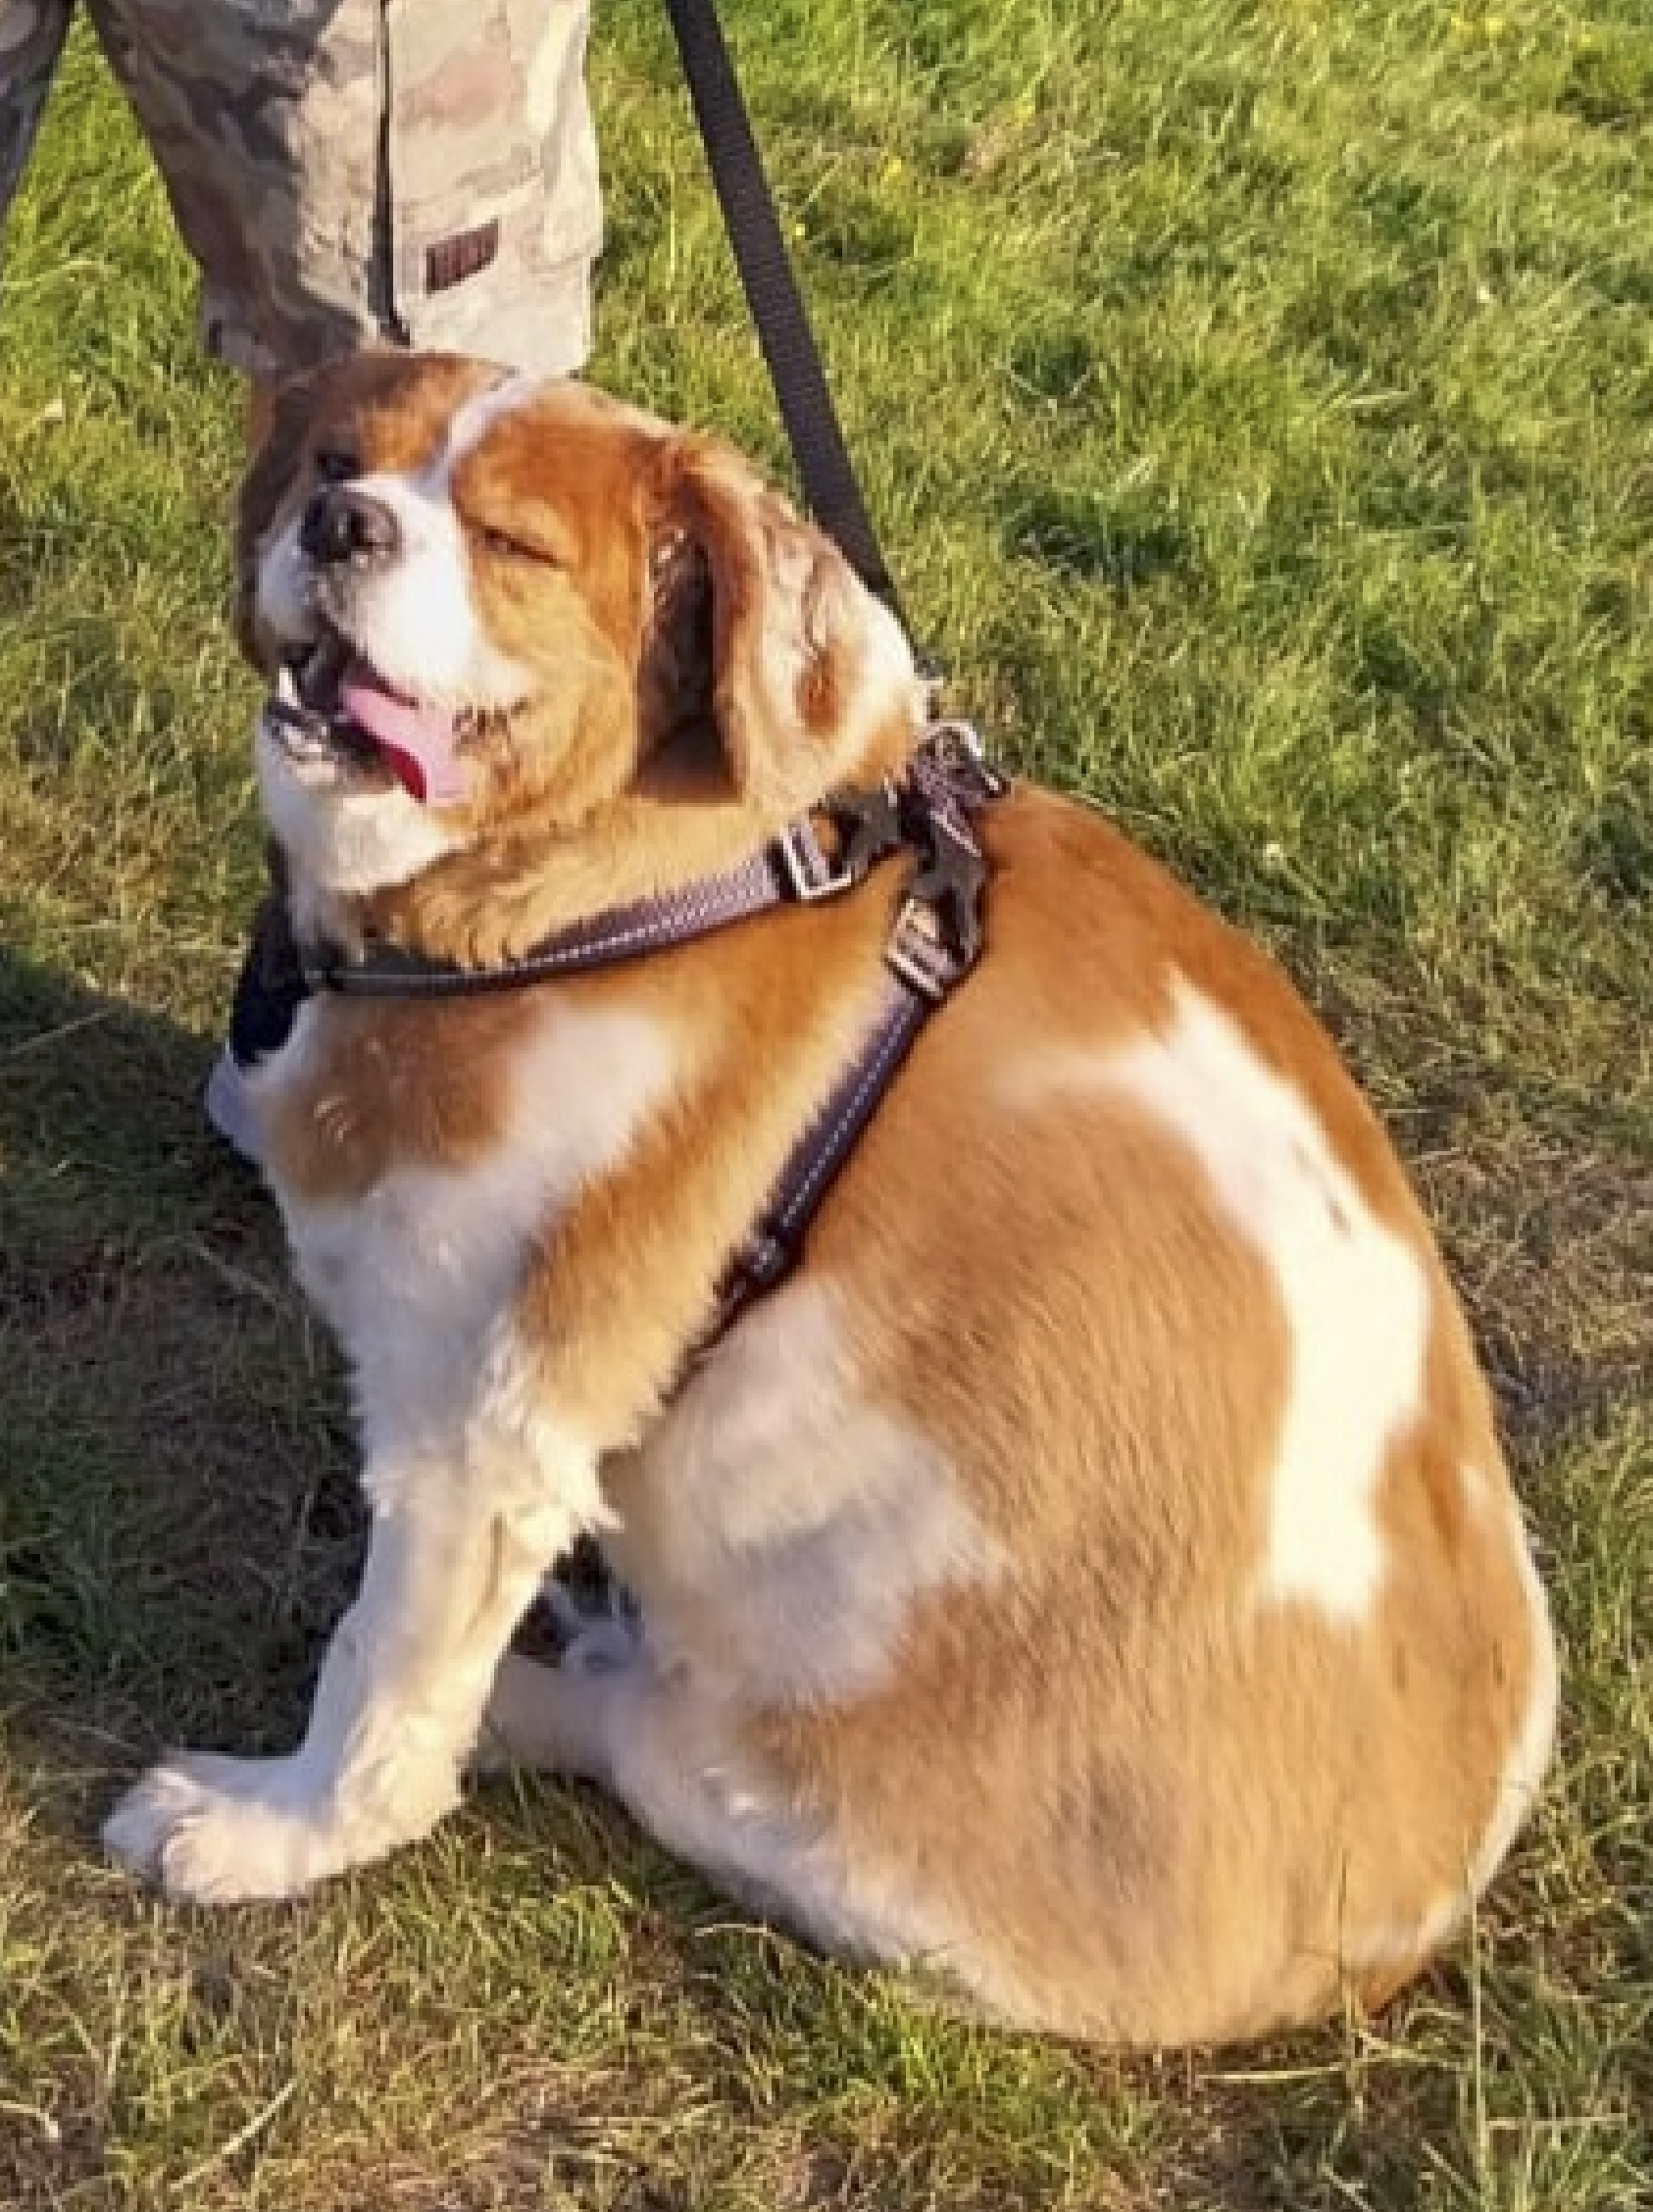 Lancashire vets help 'obese' King Charles Cavalier Spaniel lose weight on special dog diet